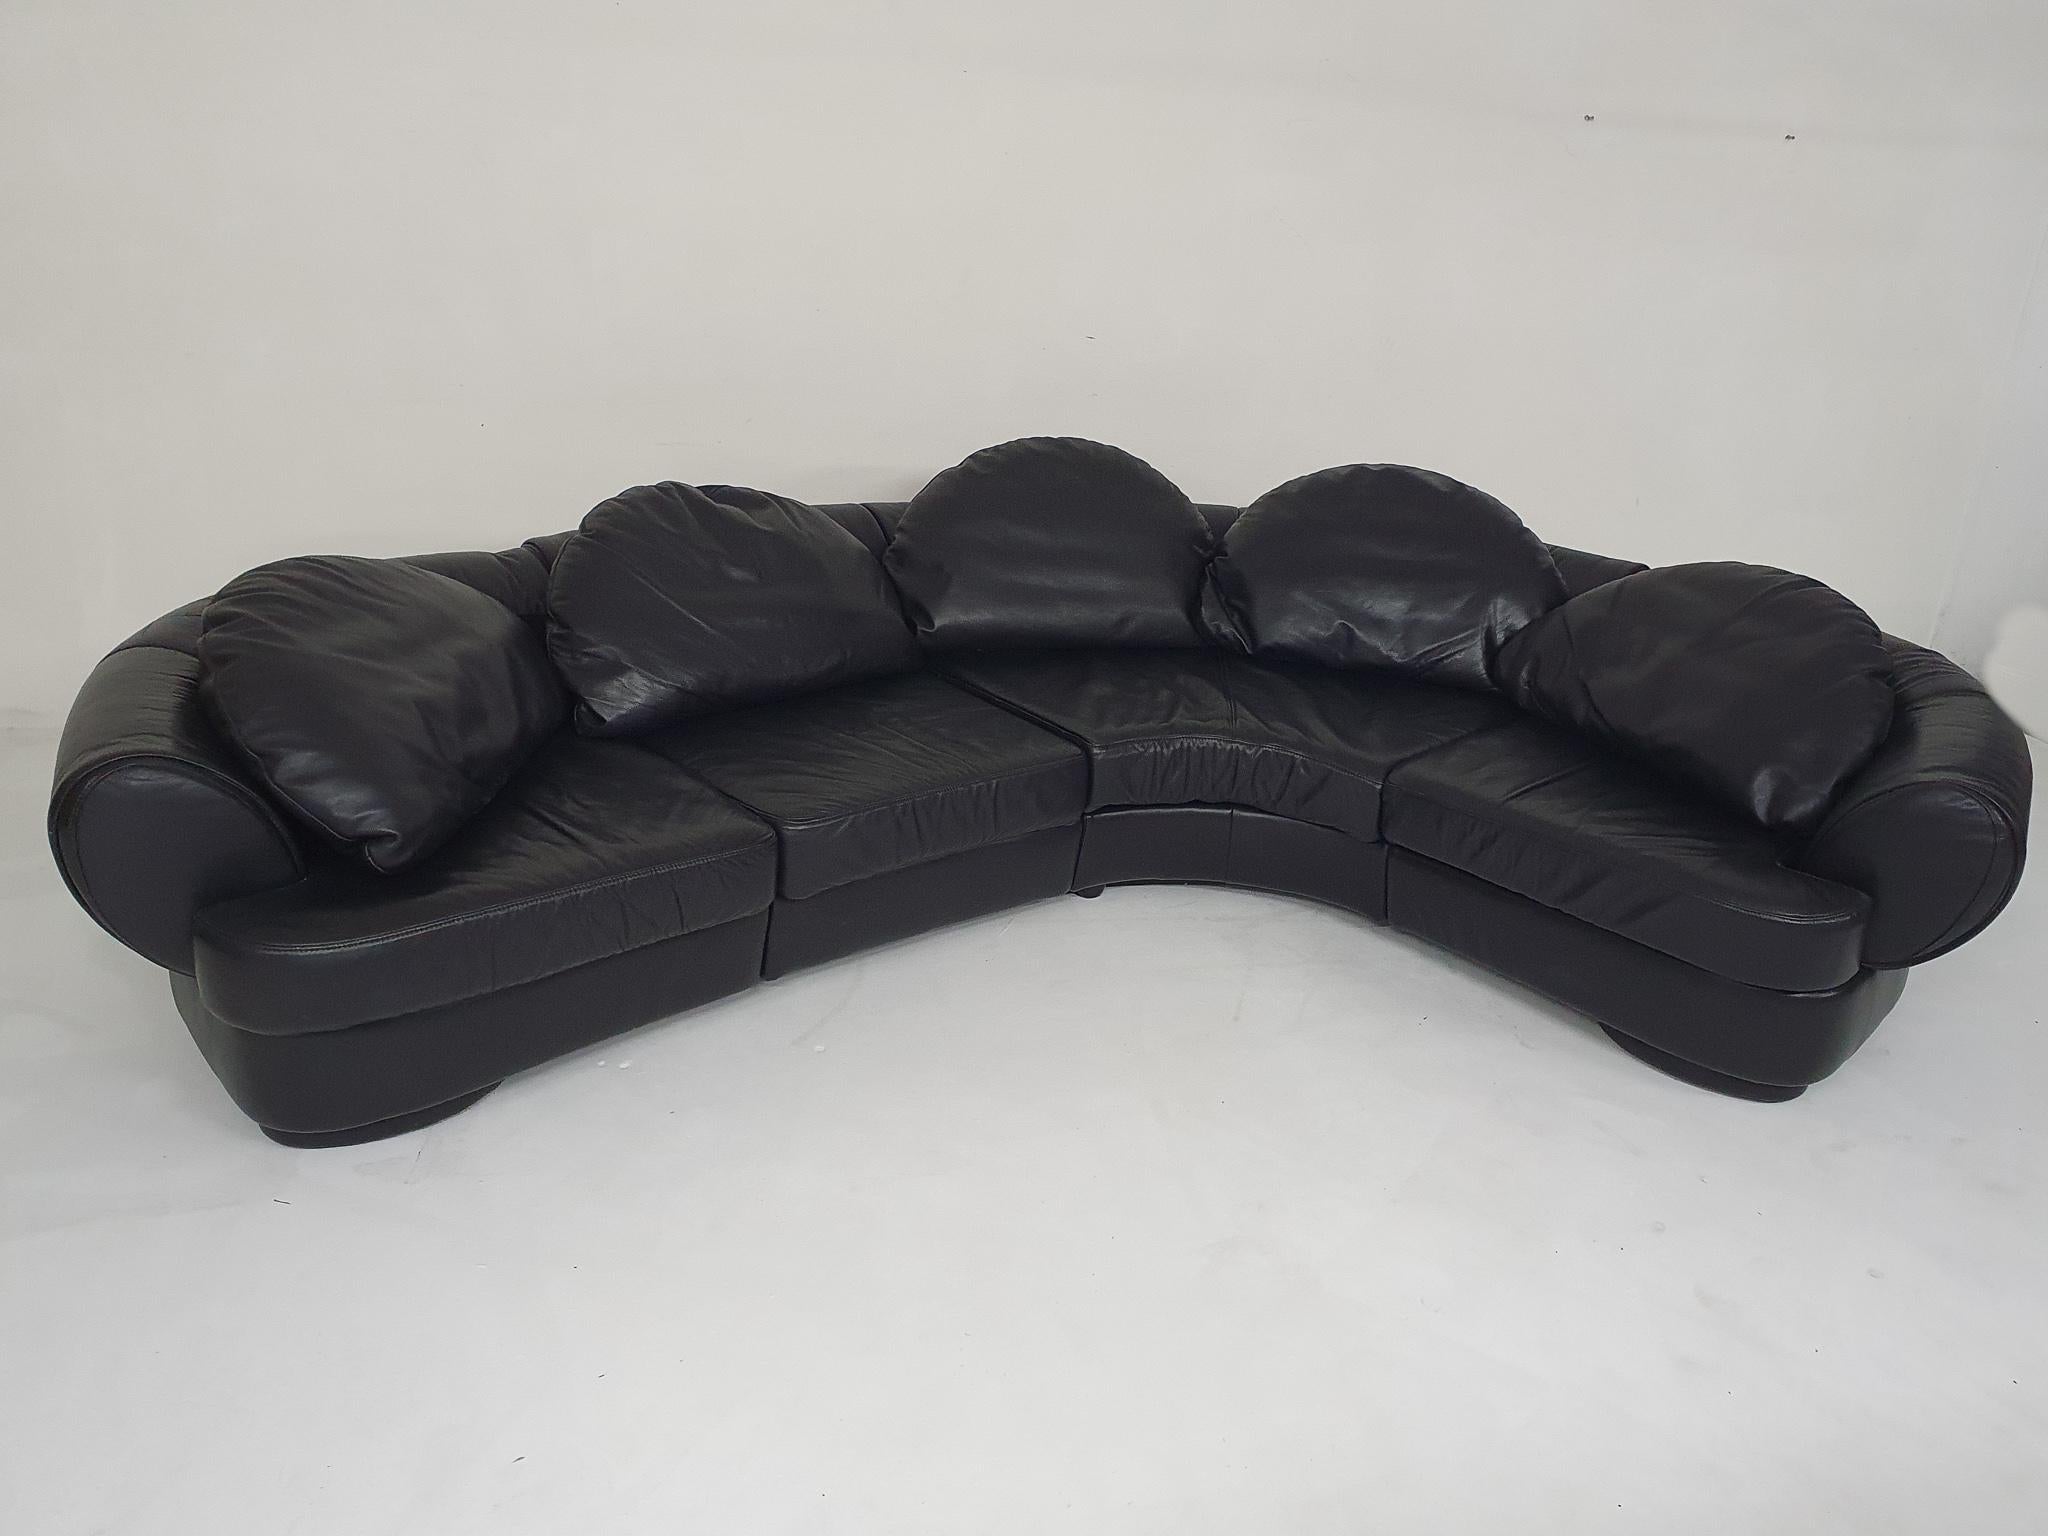 Sectional sofa in original high quality black leather upholstery. The sofa is from the ieghties but is still in good condition. It consists of 4 parts which are attached to each other with metal pins. The moonshaped back pillows are attached with